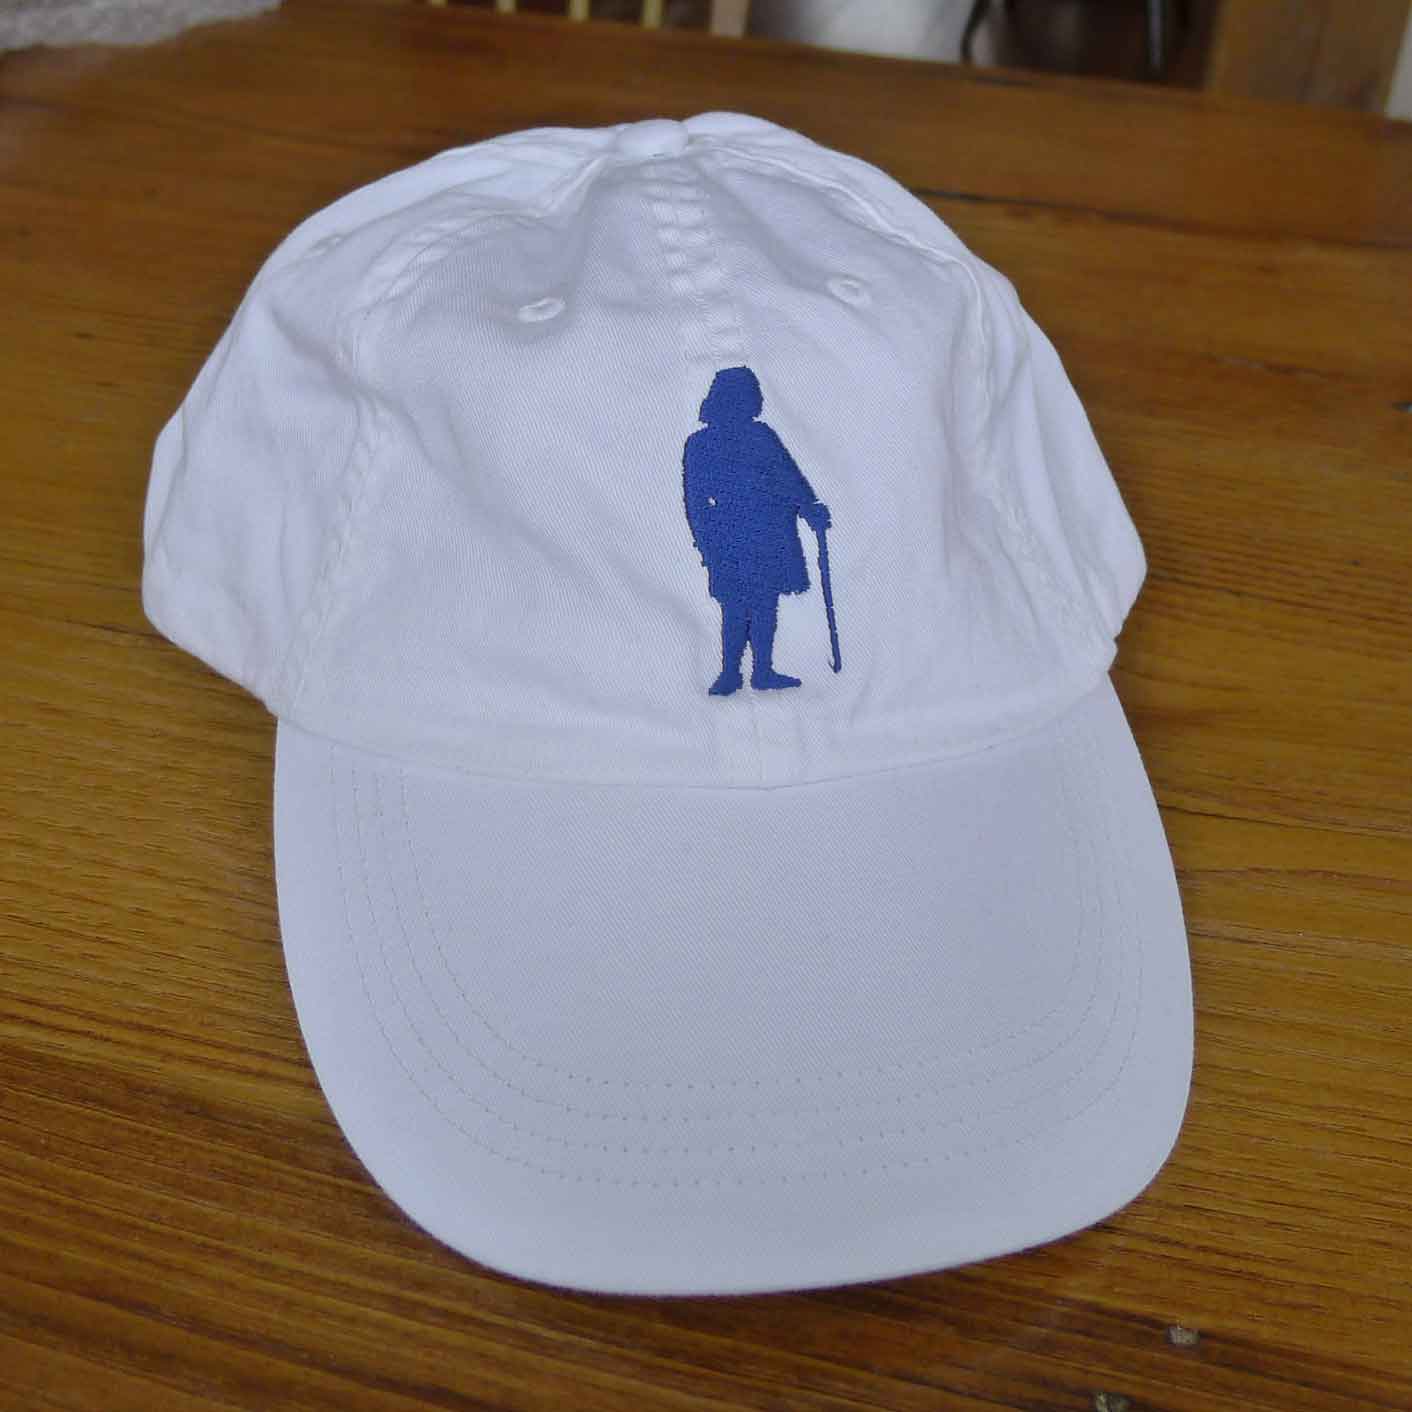 Embroidered Ben Franklin "History Nerd" cap - Blue on white cap from The History List Store